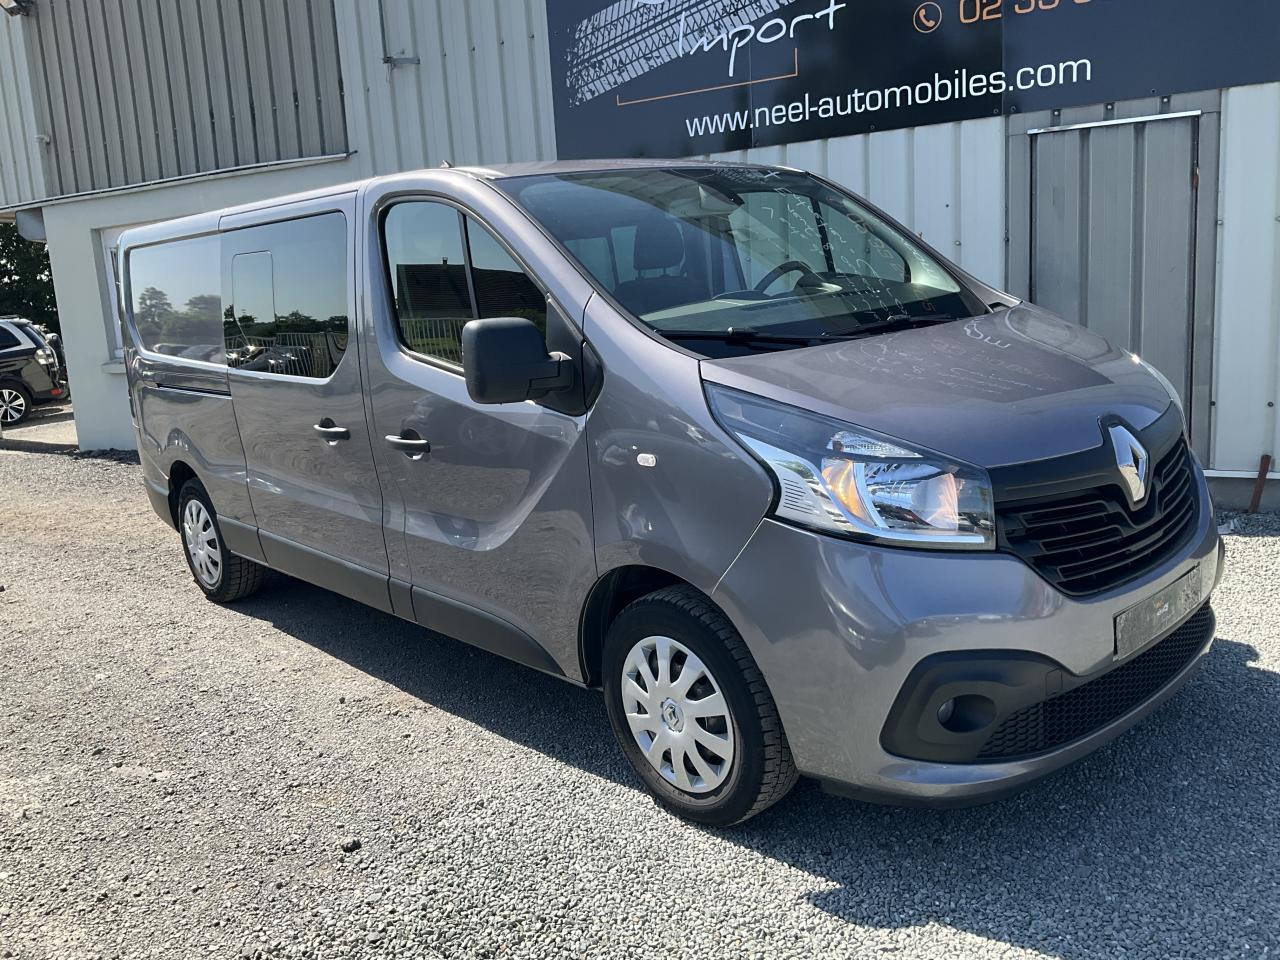 Renault Trafic 2 Phase II 2.0 DCI 115 cv 6 Places L2h1 Cabine Approfondie  (Double Cabine) Grand Confort 105000km-Première-Main - Utilitaires